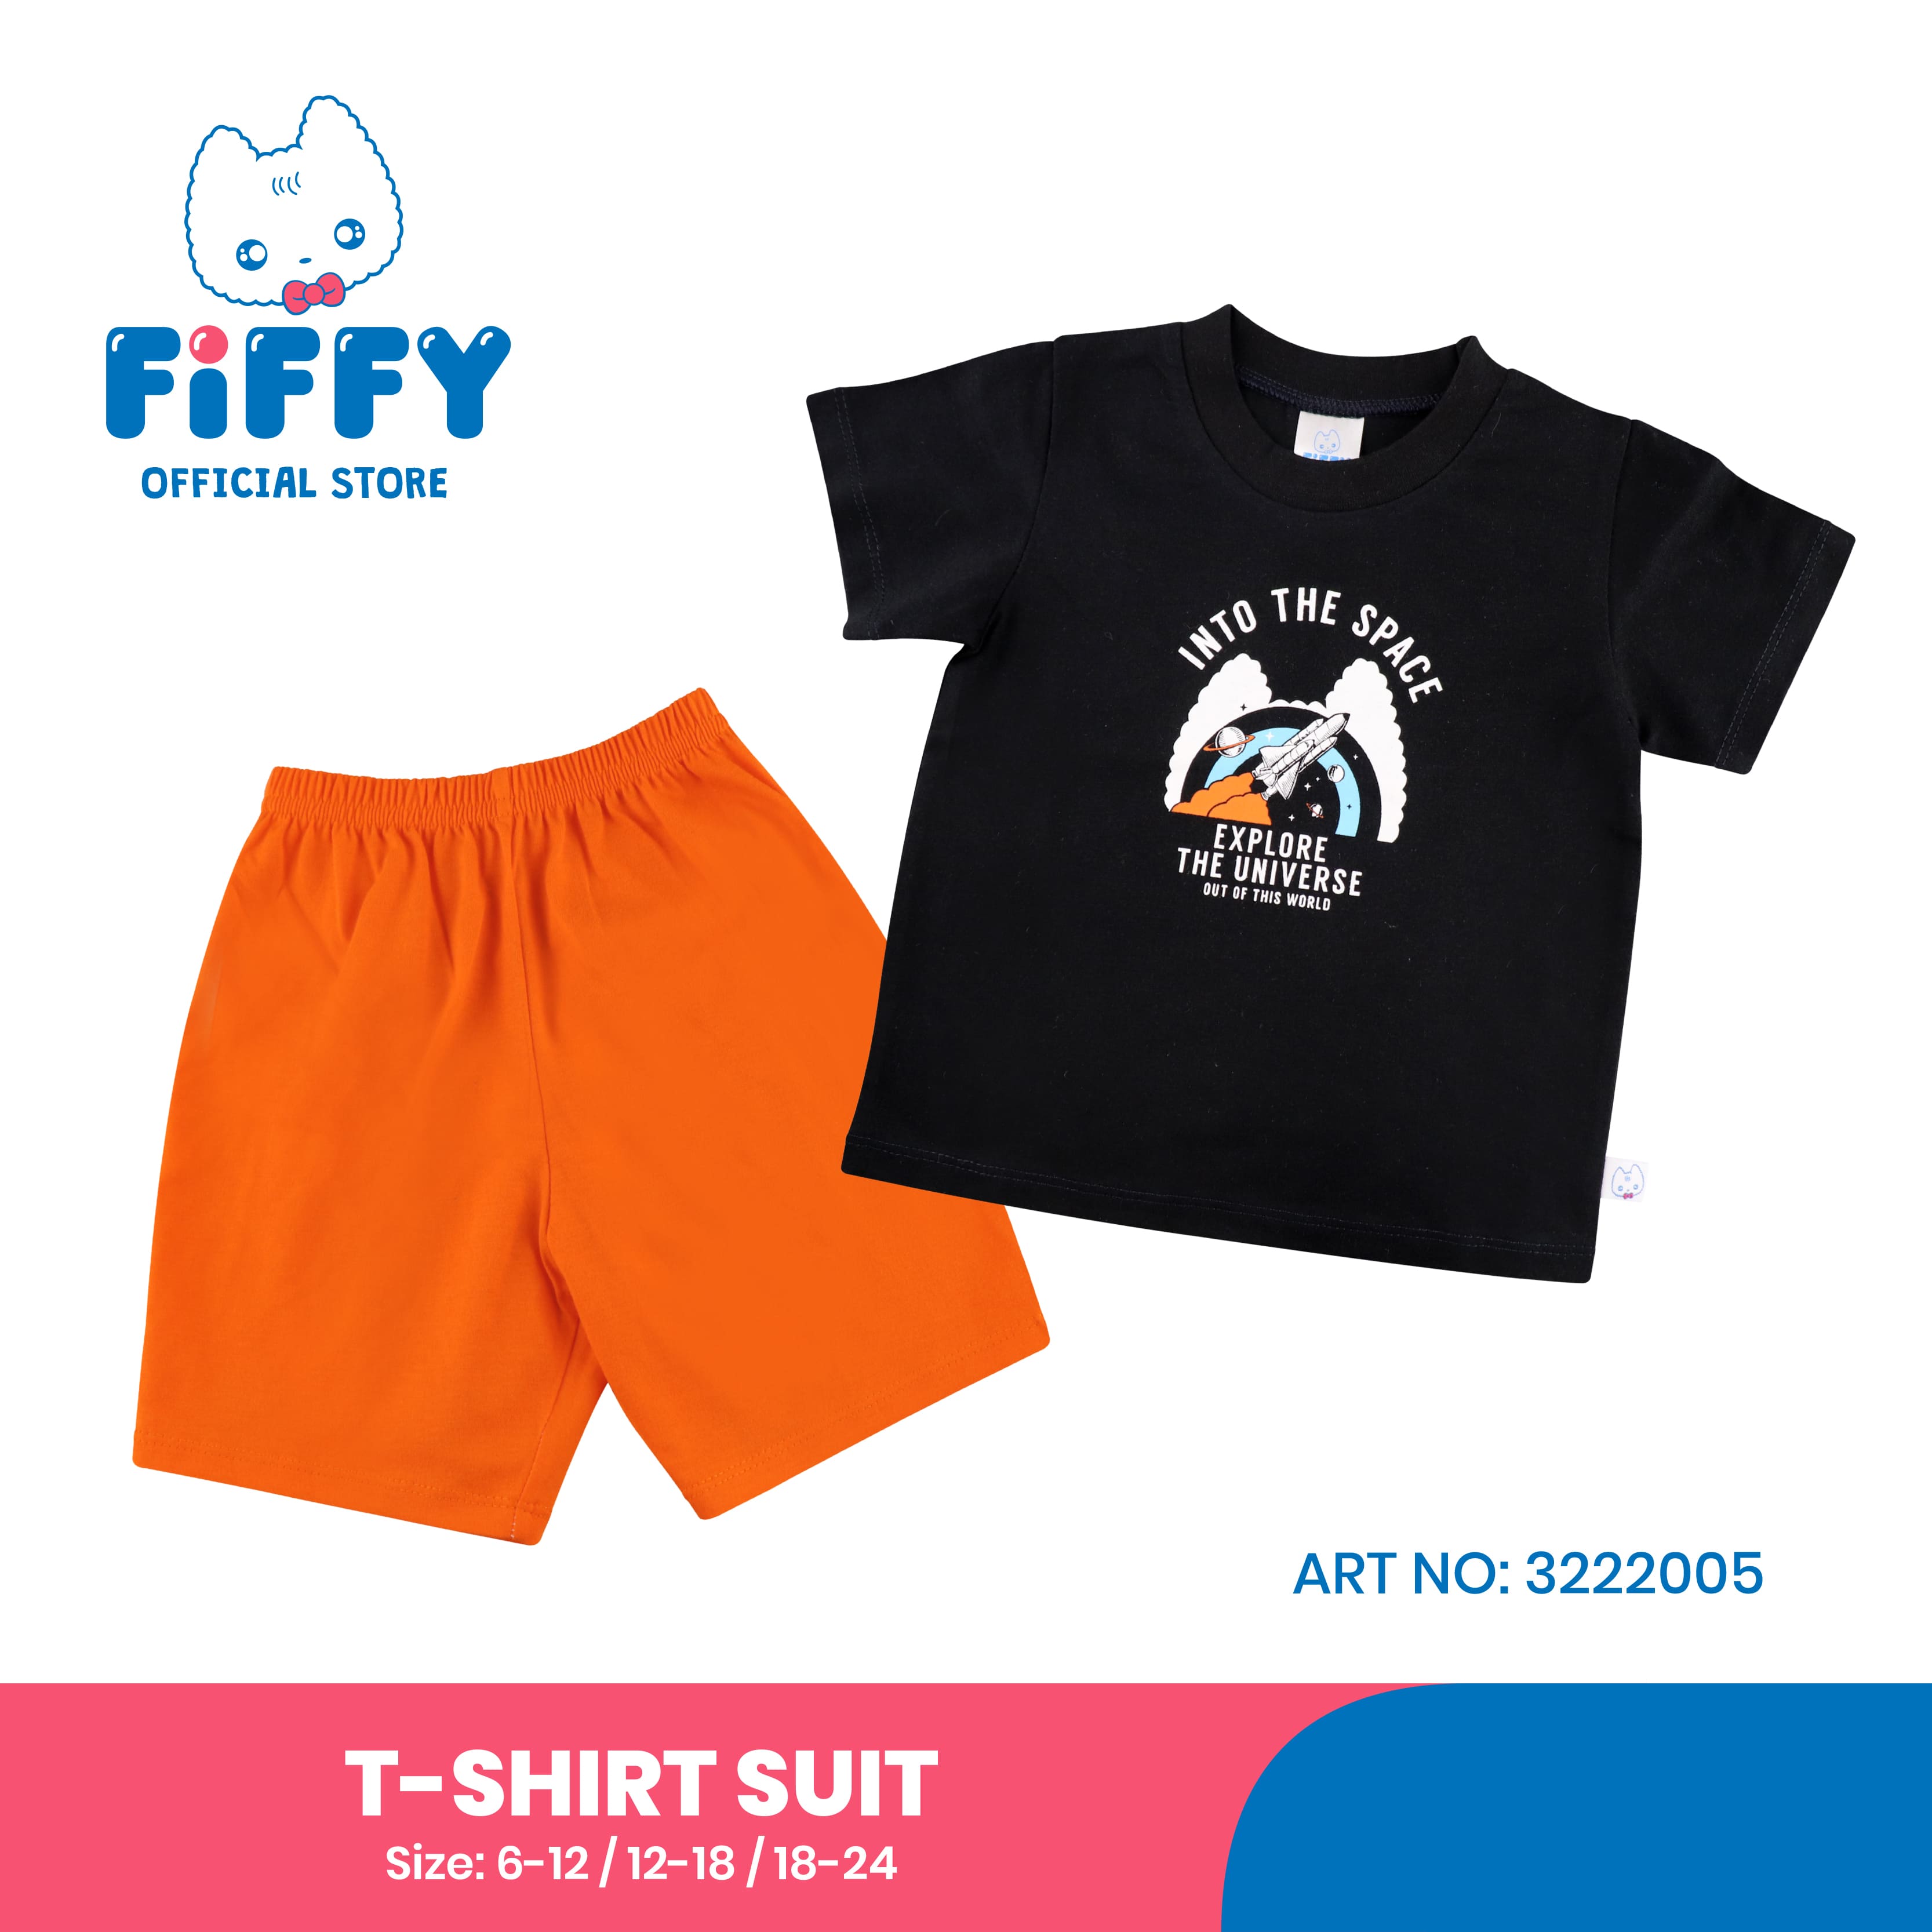 FIFFY INTO THE SPACE T-SHIRT SUIT